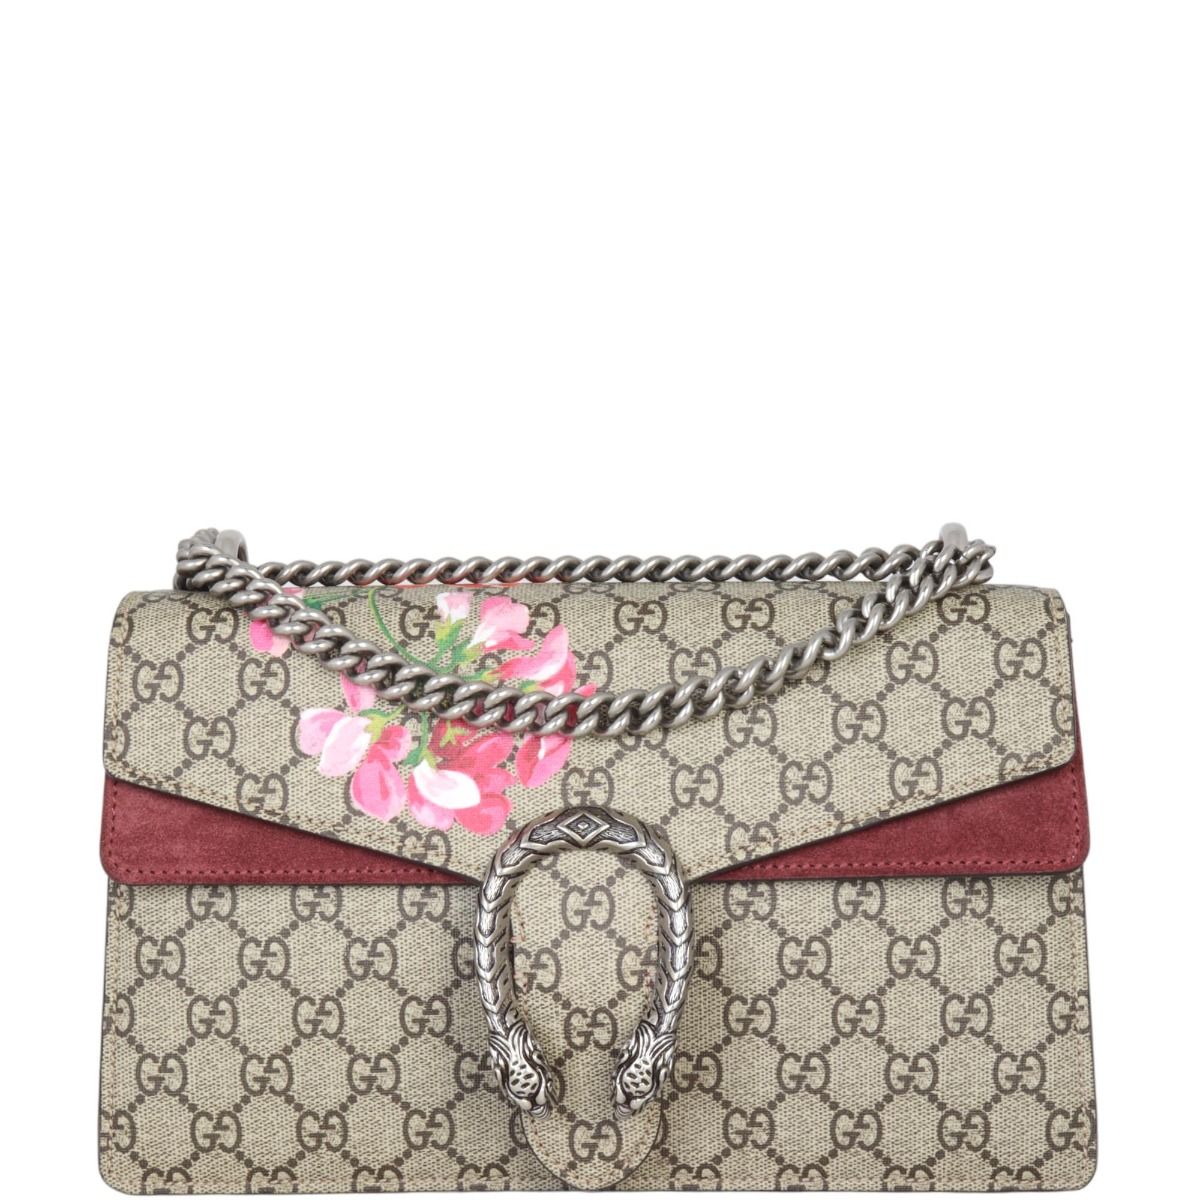 Gucci Dionysus GG Supreme Suede Mini Red in Suede with Silver-tone